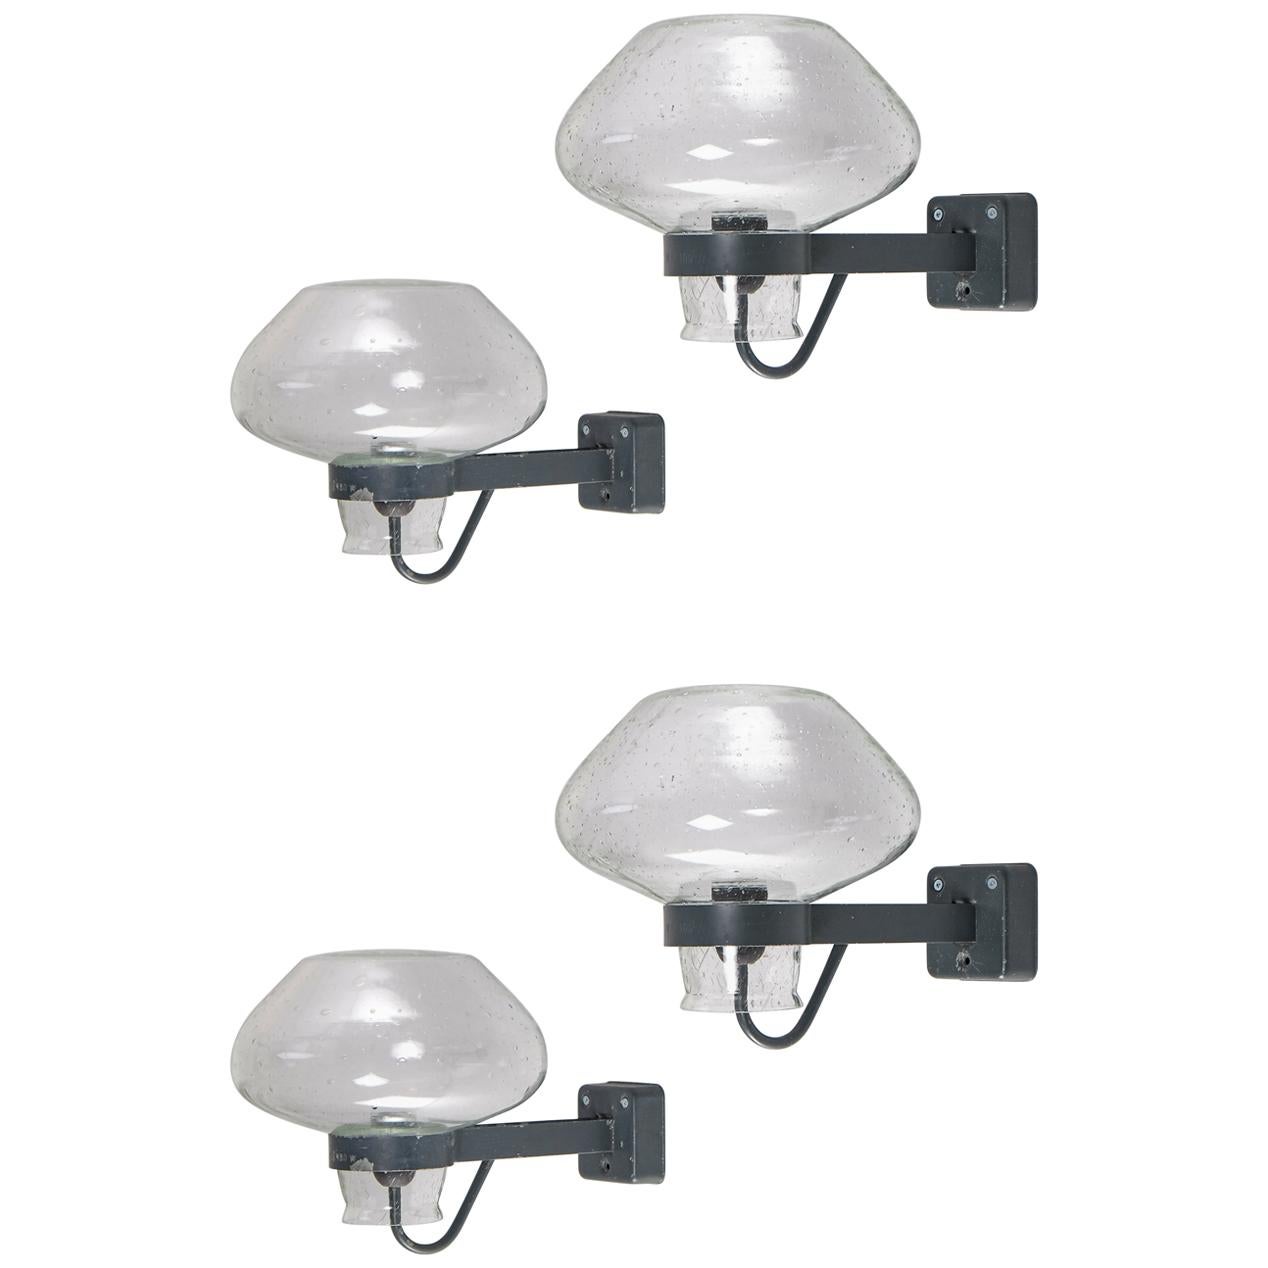 Set of 4 Wall Lamps designed by Gunnar Asplund for ASEA, 1950s